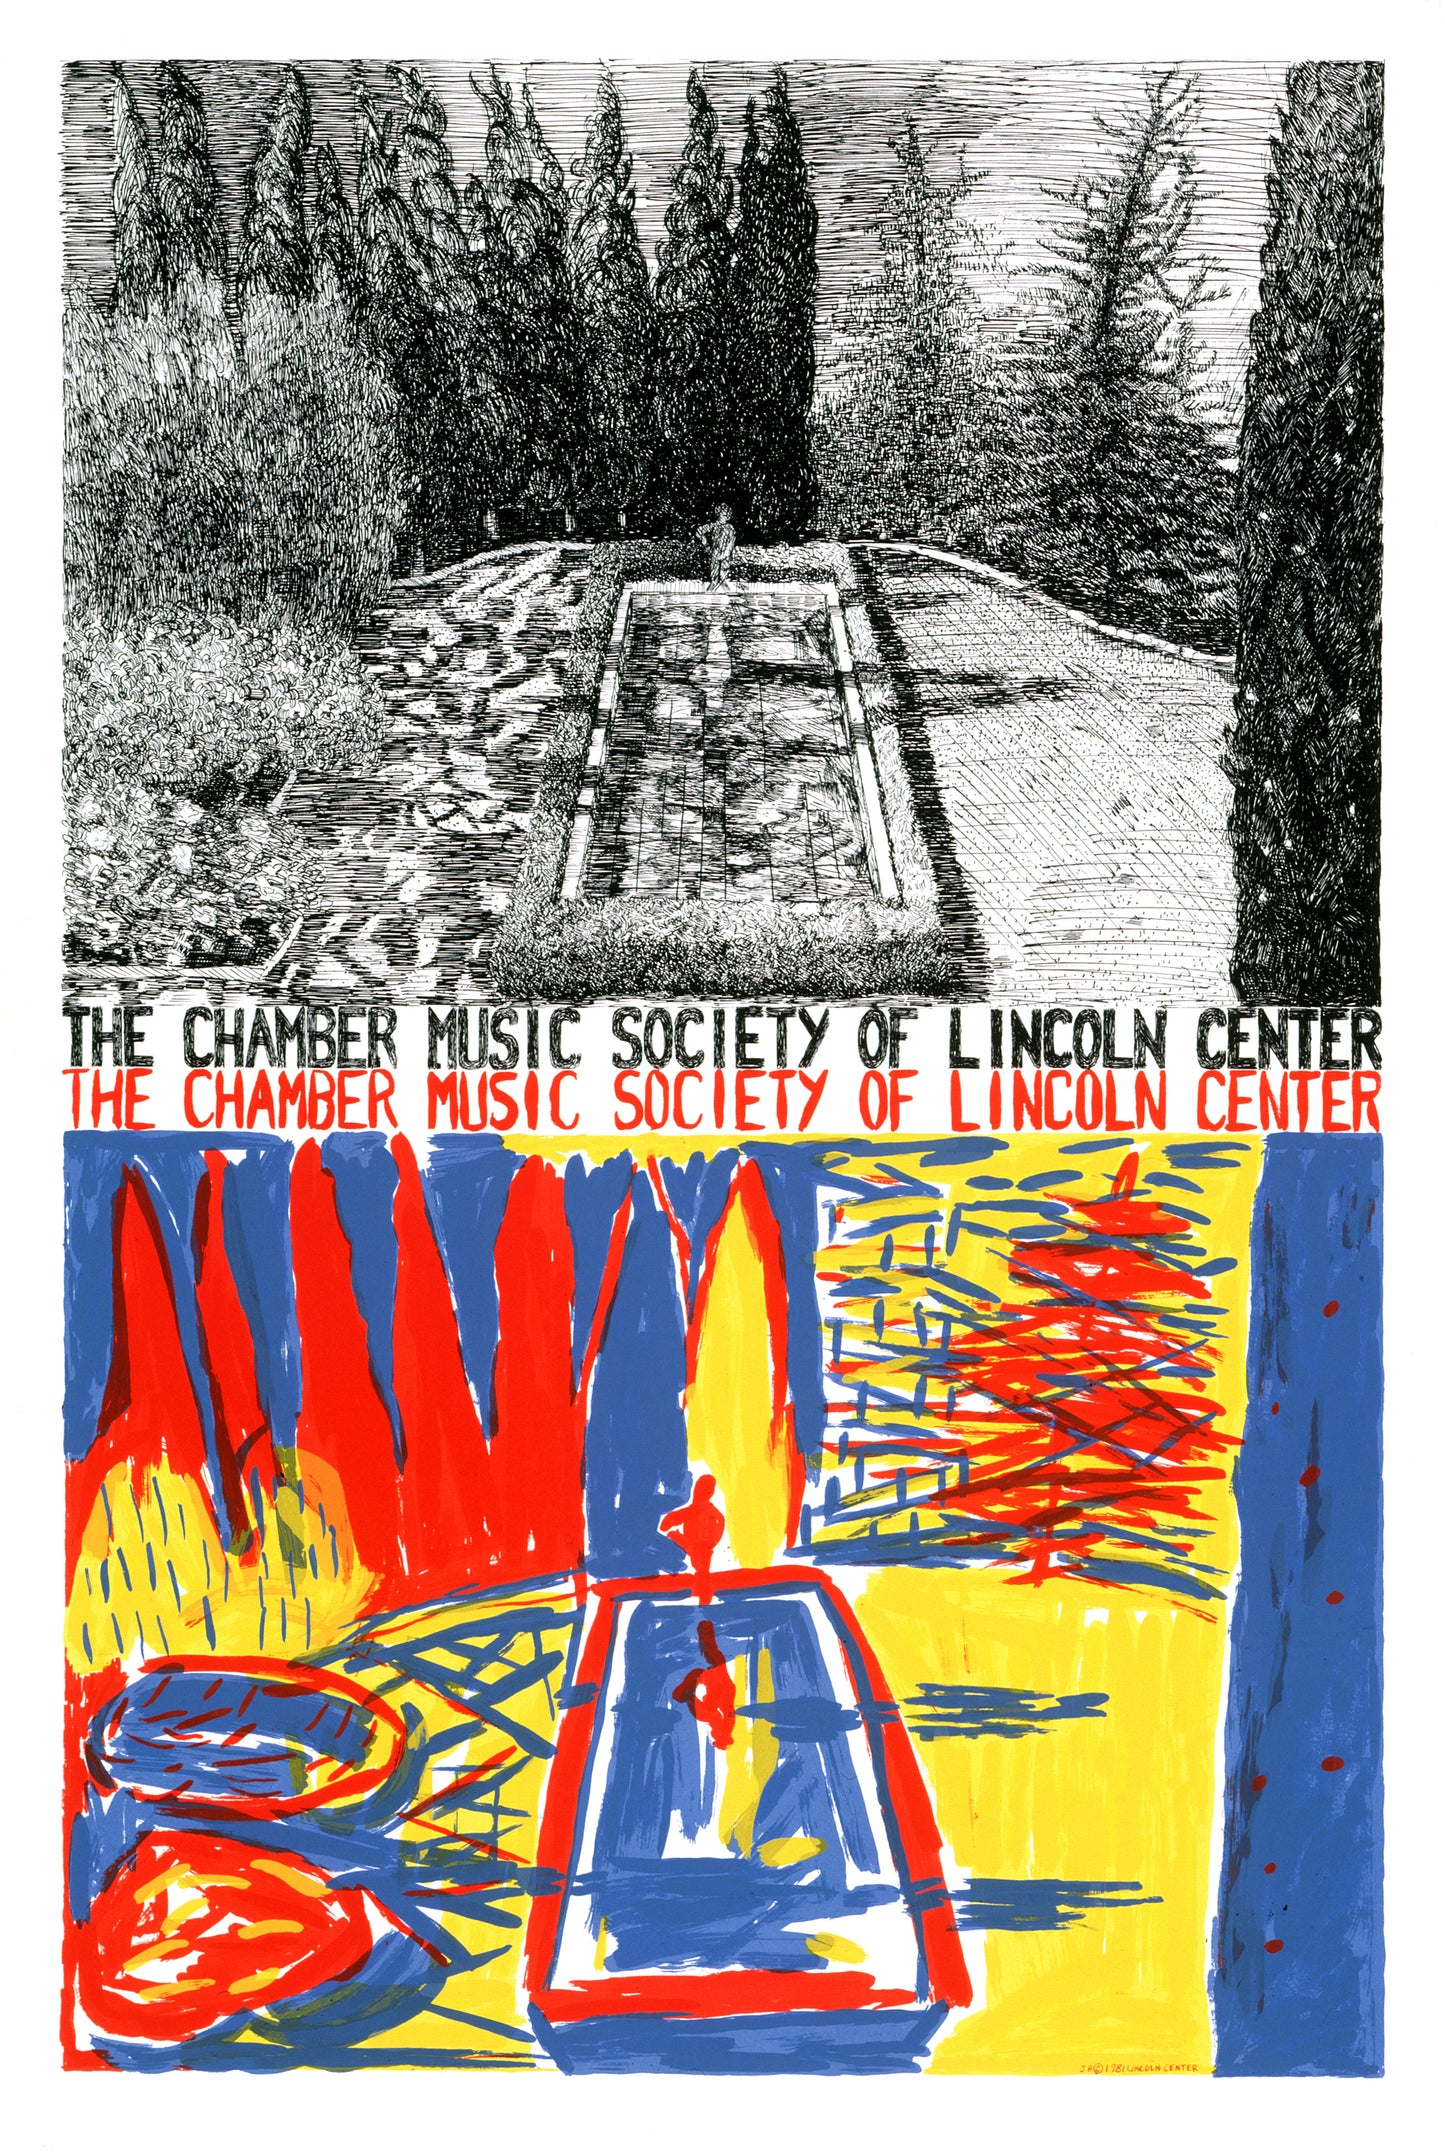 “Untitled” by Jennifer Bartlett, Dual-panel artwork juxtaposing realism and abstraction: the top features a monochromatic, impressionist landscape of a forested path, while the bottom presents a vivid, expressionist still life with bold colors and dynamic forms, promoting The Chamber Music Society of Lincoln Center. 